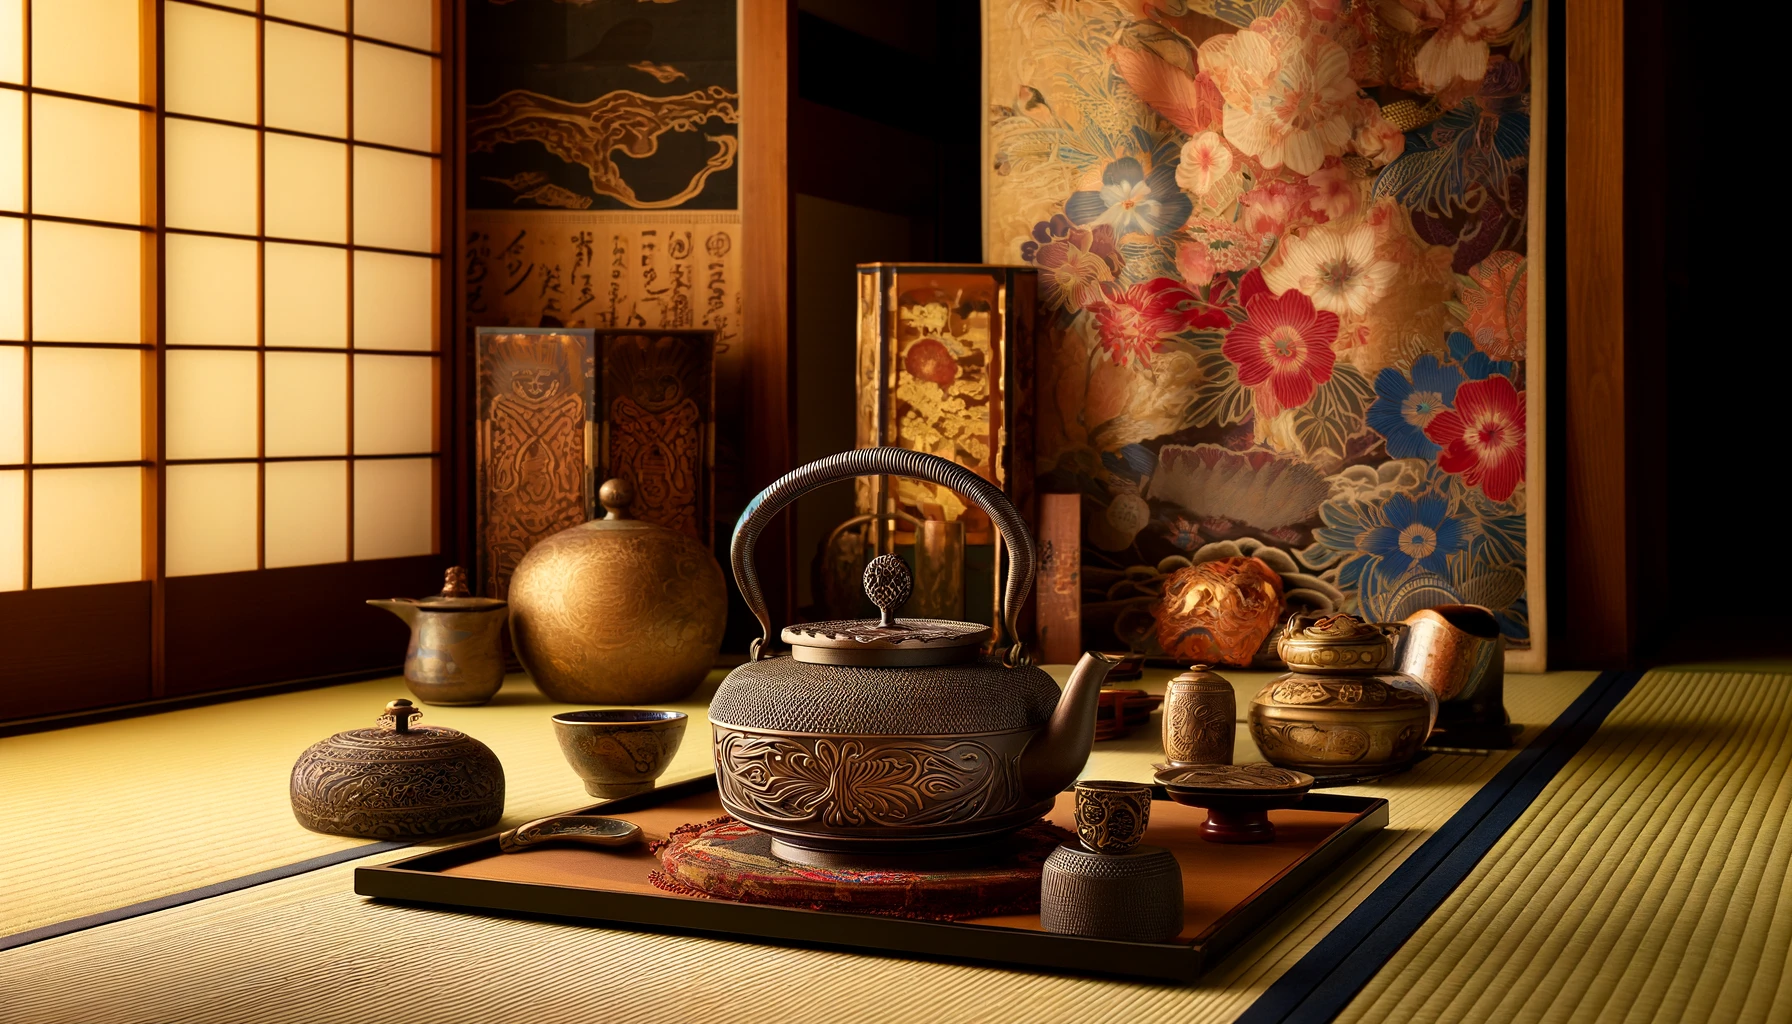 A detailed representation of traditional crafts from Iwate, Japan, focusing on the renowned Nanbu ironware. The image features a beautifully crafted Nanbu iron teapot with intricate designs, set on a traditional Japanese tatami mat. Alongside, there are colorful Yuzen dye fabrics and intricate lacquerware, showcasing the rich craftsmanship of the region. The background is a softly lit, traditional Japanese room with wooden accents and paper sliding doors, providing a warm and inviting atmosphere that highlights the elegance of Iwate's traditional crafts.